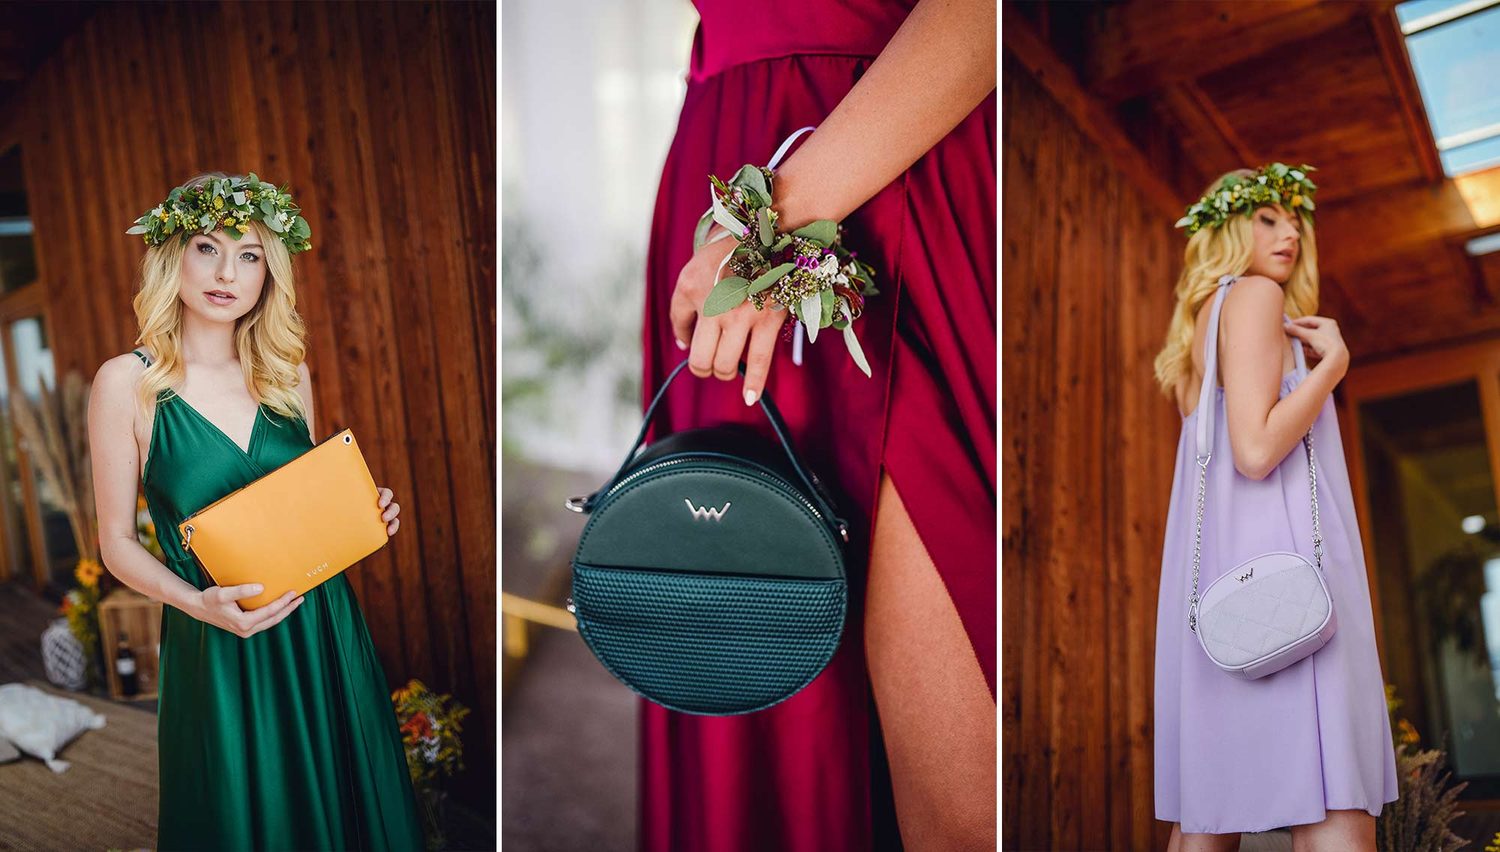 Vuch - New collection: Wedding handbags on the Vuch scene